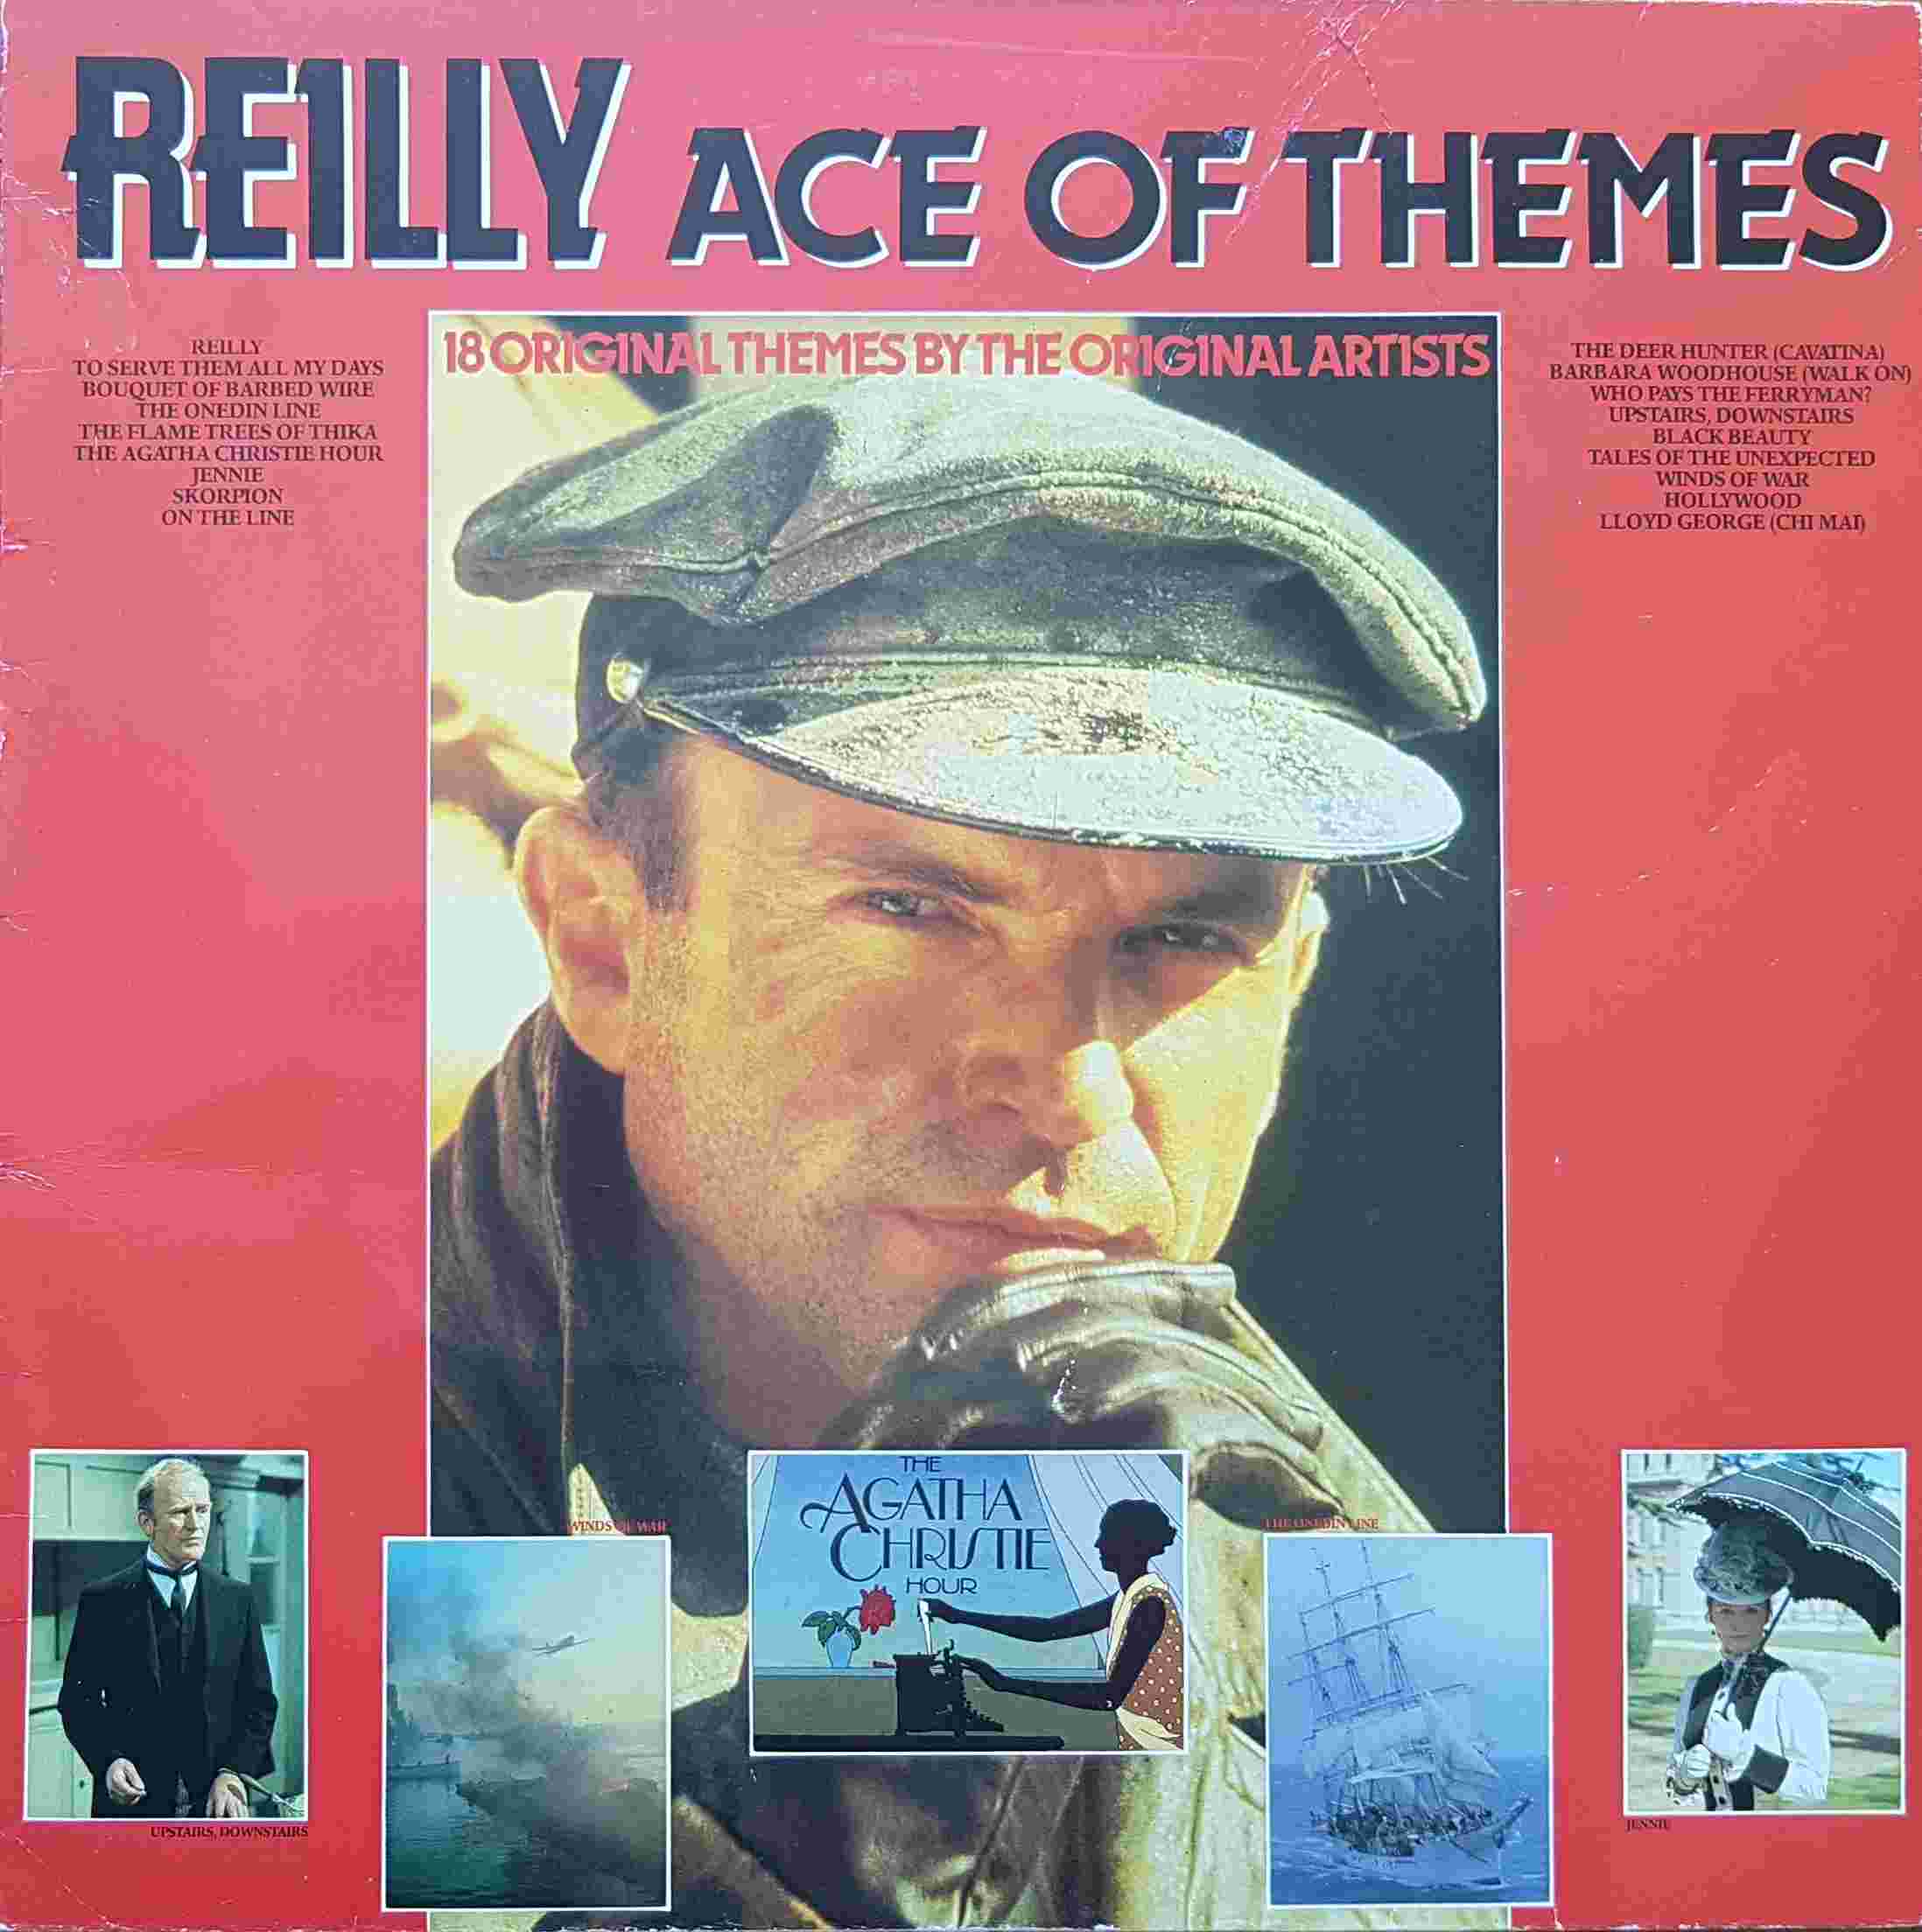 Picture of Reilly ace of themes by artist Various from ITV, Channel 4 and Channel 5 albums library